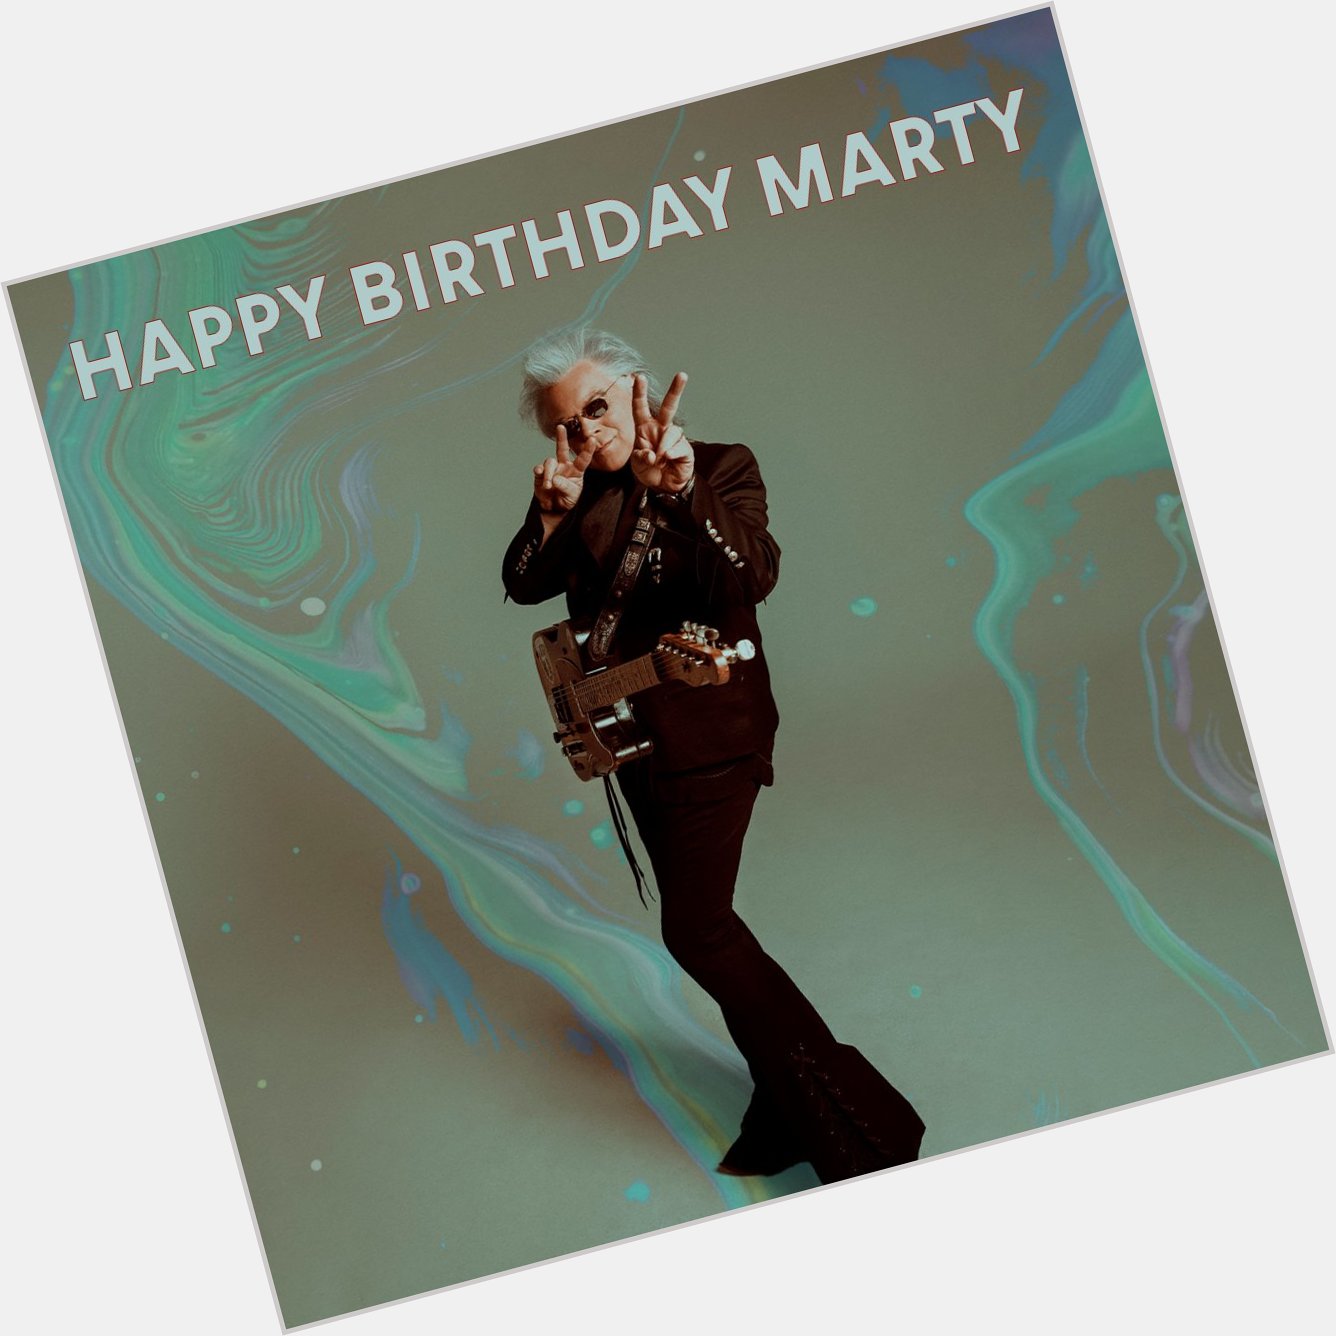 Join us in wishing a very happy birthday today to our favorite psychadelic cowboy, Mr. Marty Stuart! 